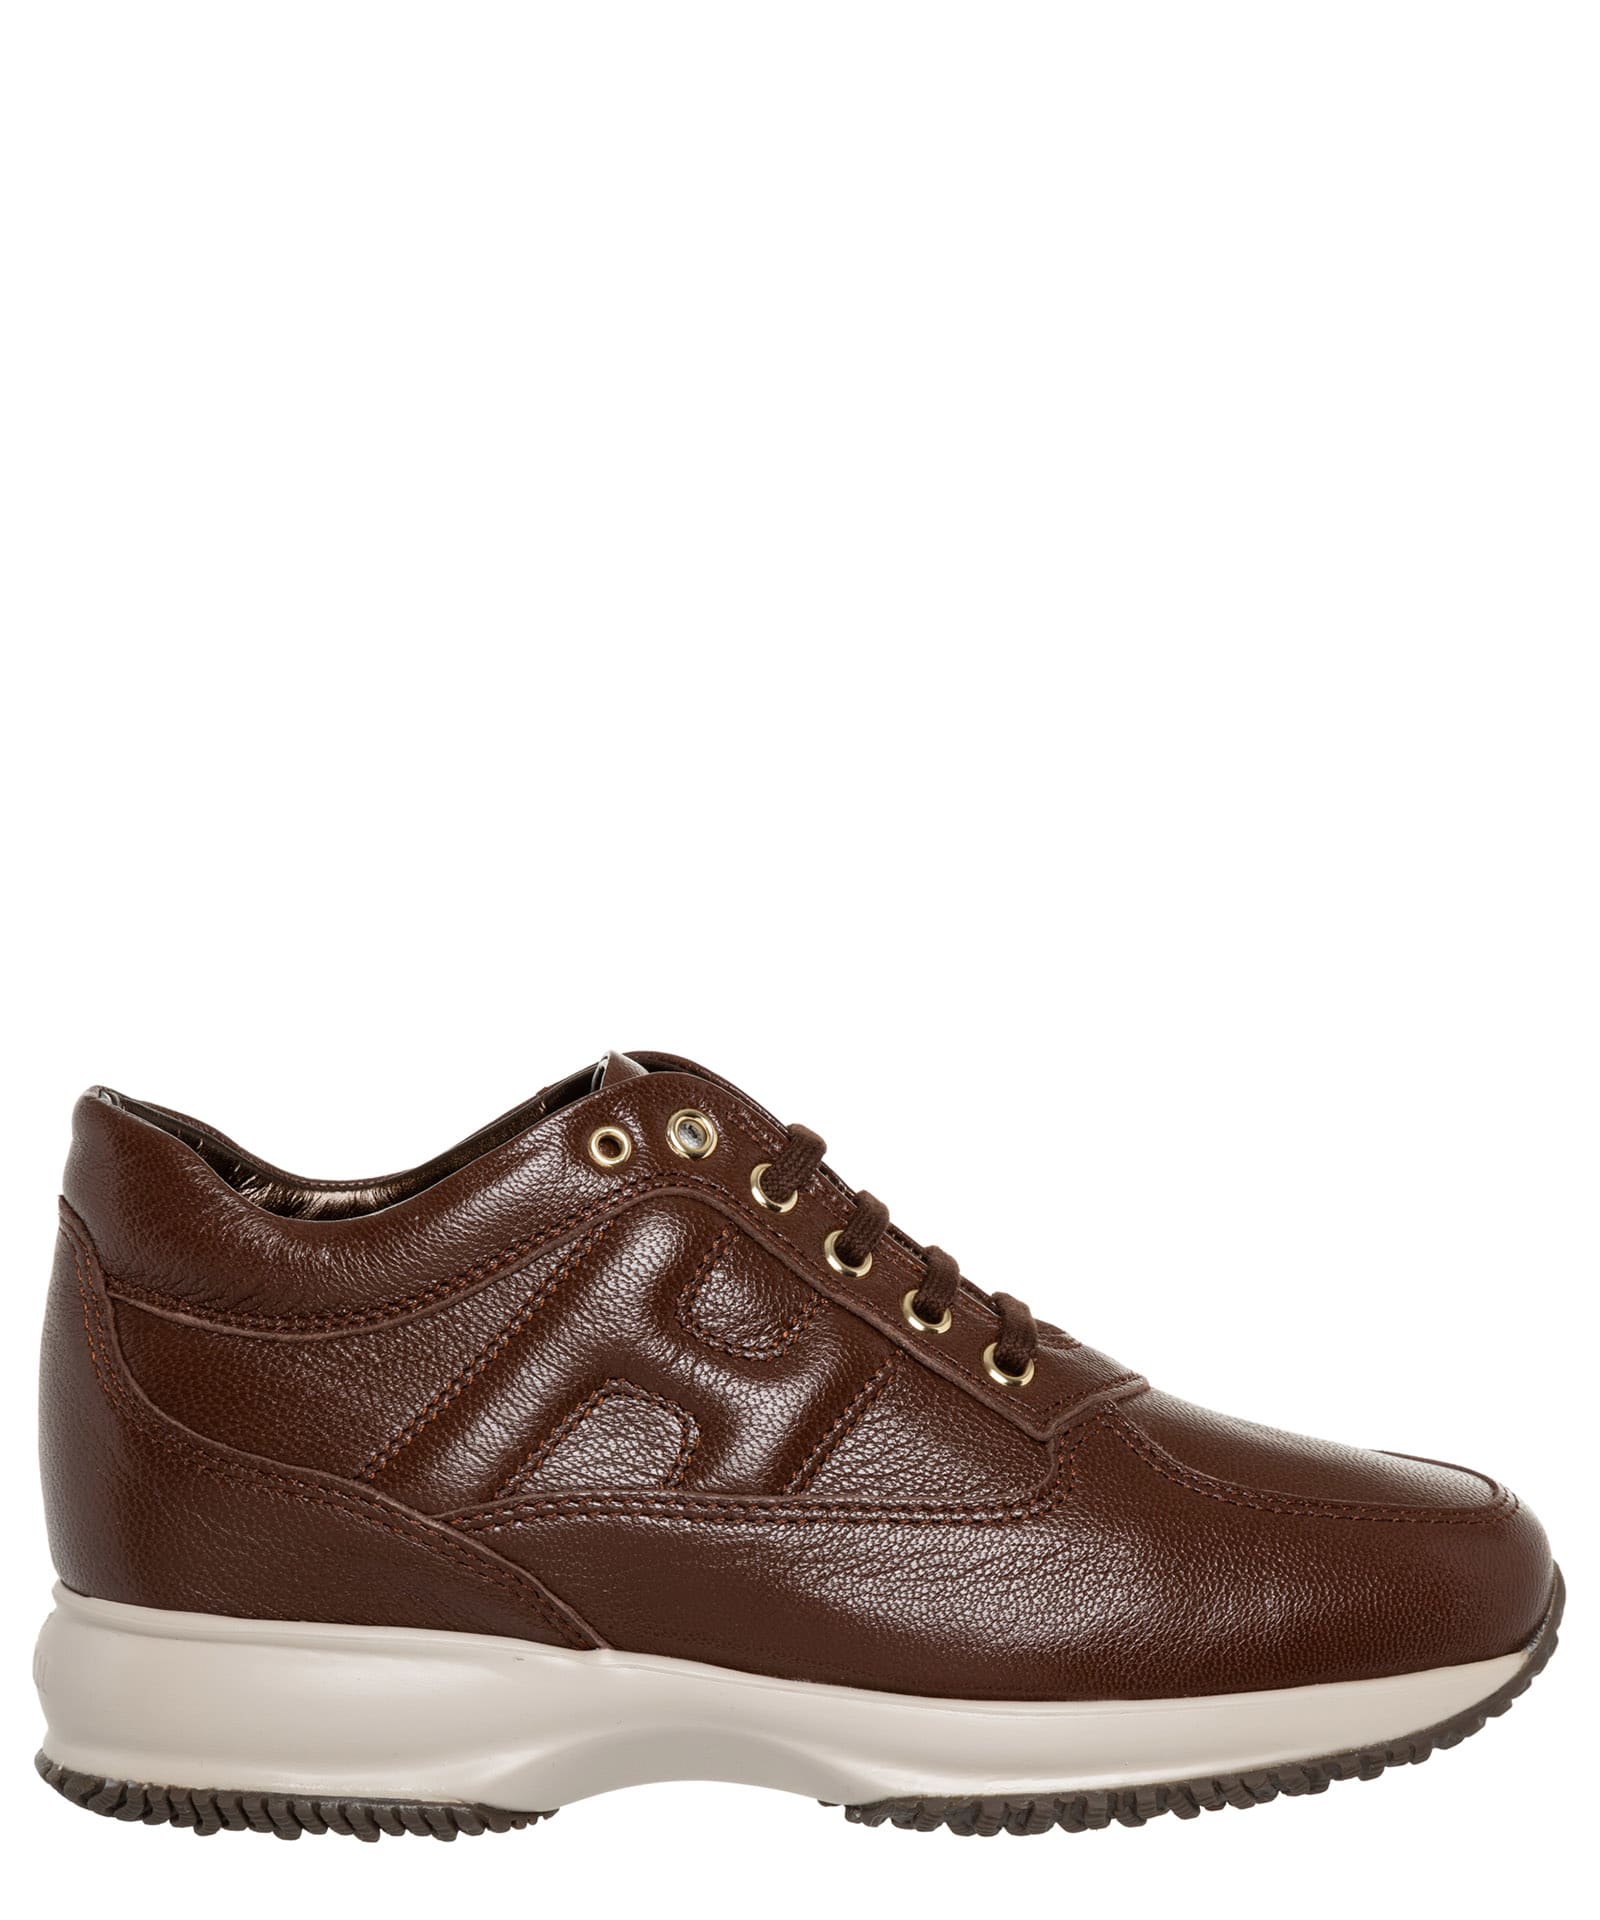 HOGAN INTERACTIVE LEATHER SNEAKERS